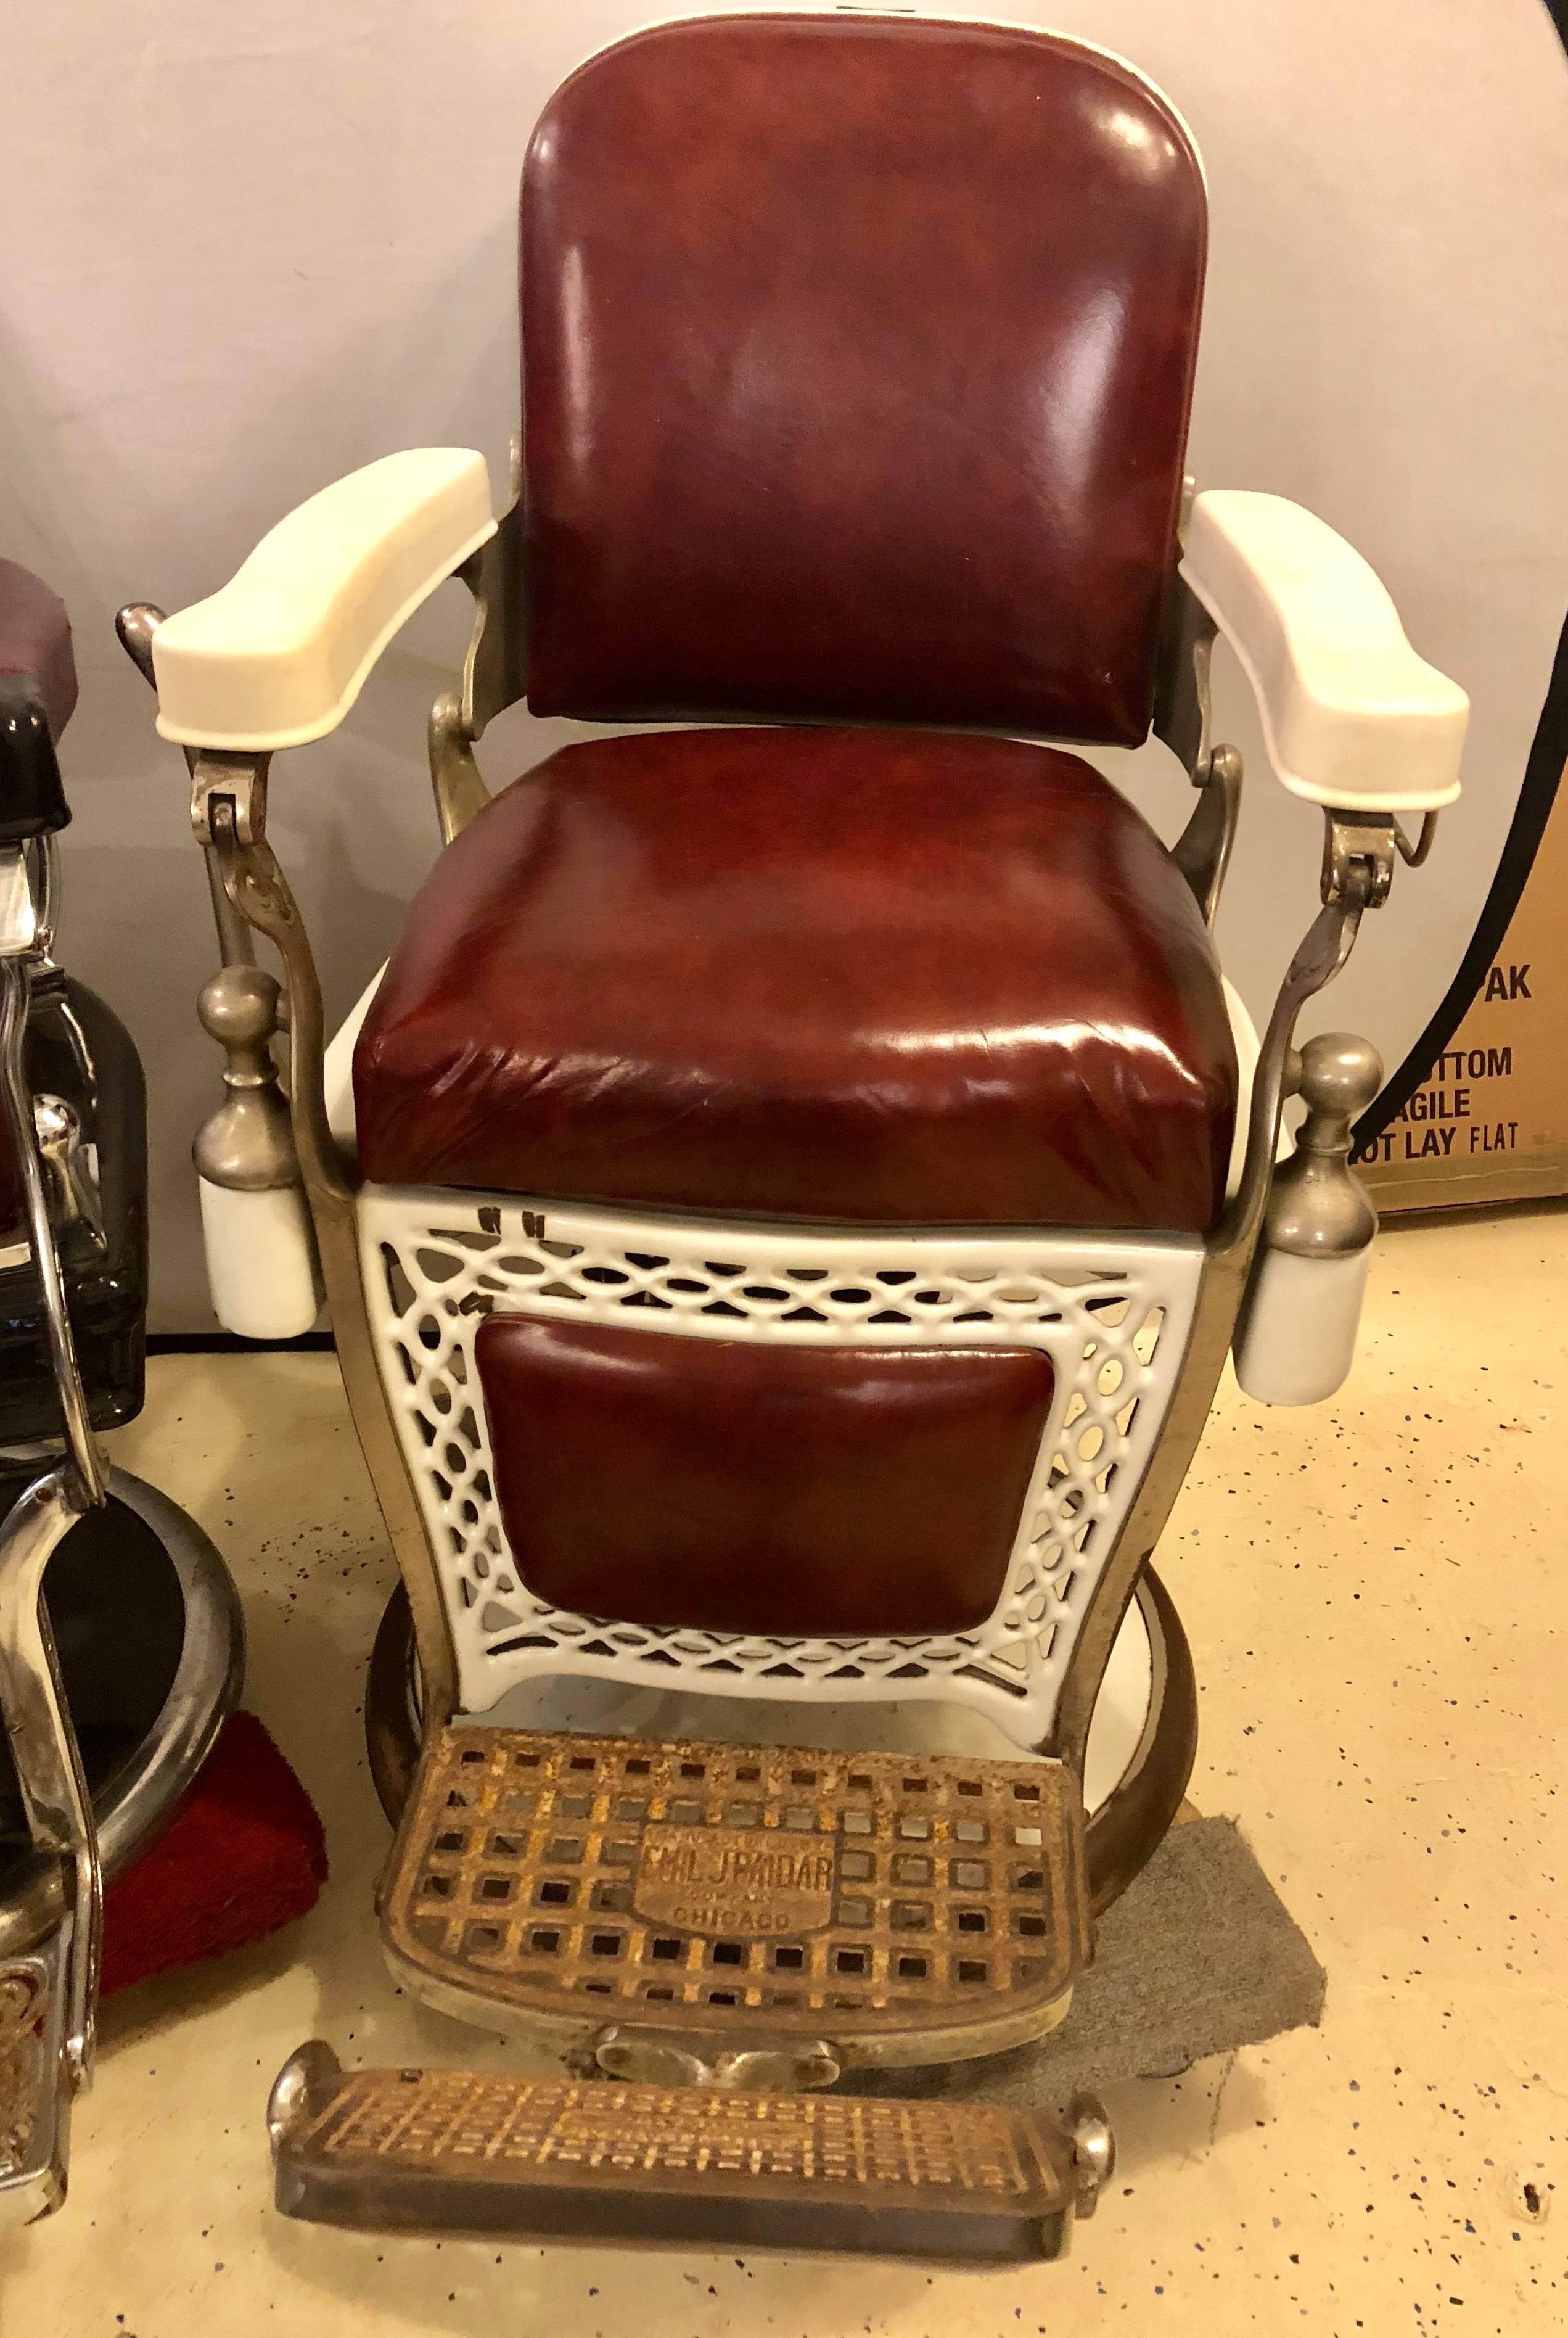 Two vintage barber chairs. Seat height is adjustable. One by Emil J. Paidar One by Koken.
Measurements for the white chairs are 40 H, 45 D, 30 W
Measurements for the black chairs are 40 H, 50 D, 30 W.